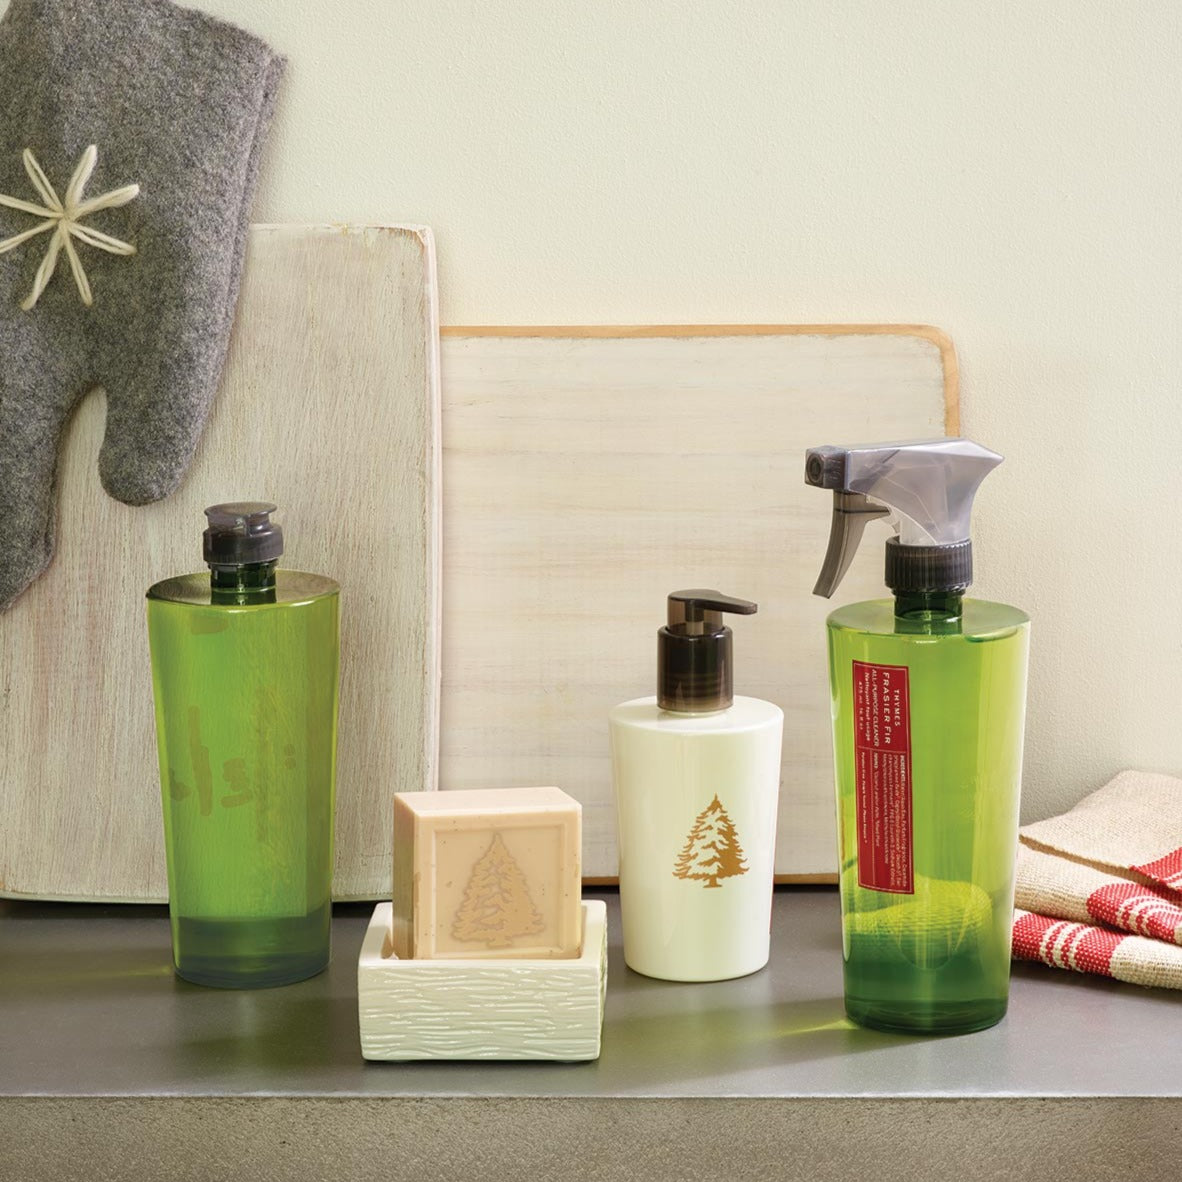 Thymes - Frasier Fir All-Purpose Cleaner at